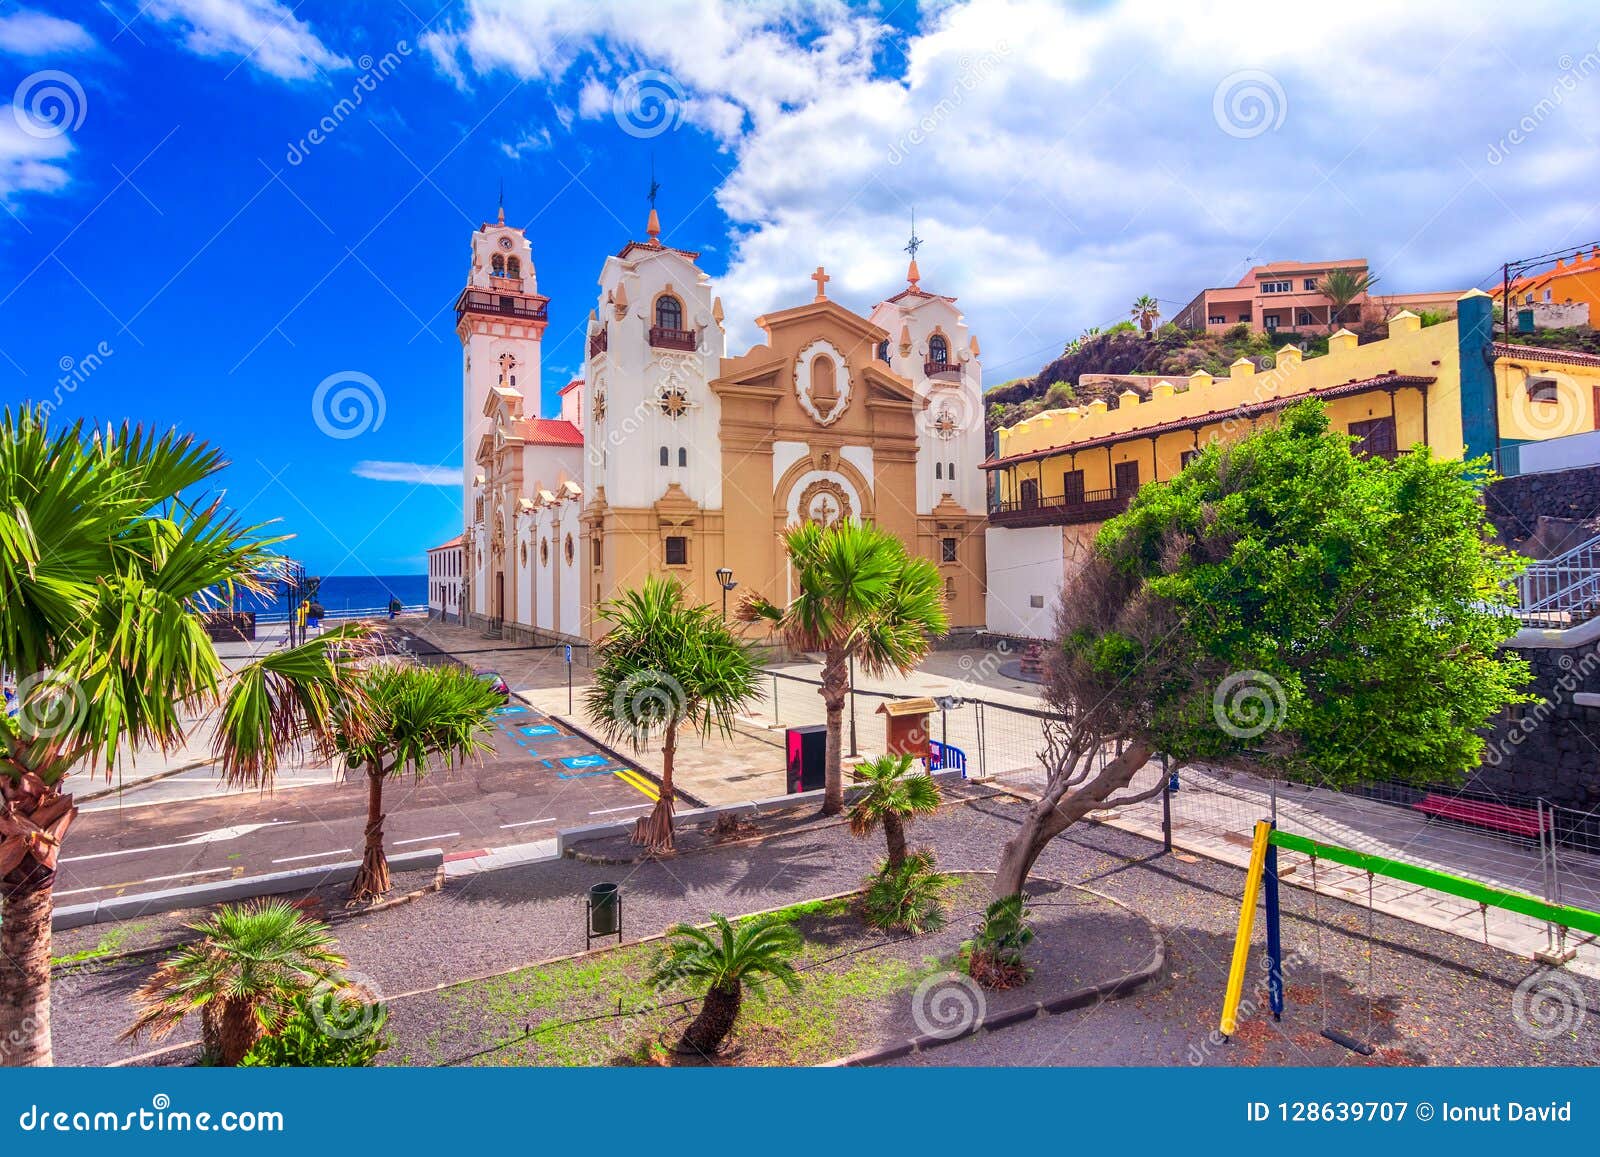 candelaria, tenerife, canary islands, spain: overview of the basilica of our lady of candelaria